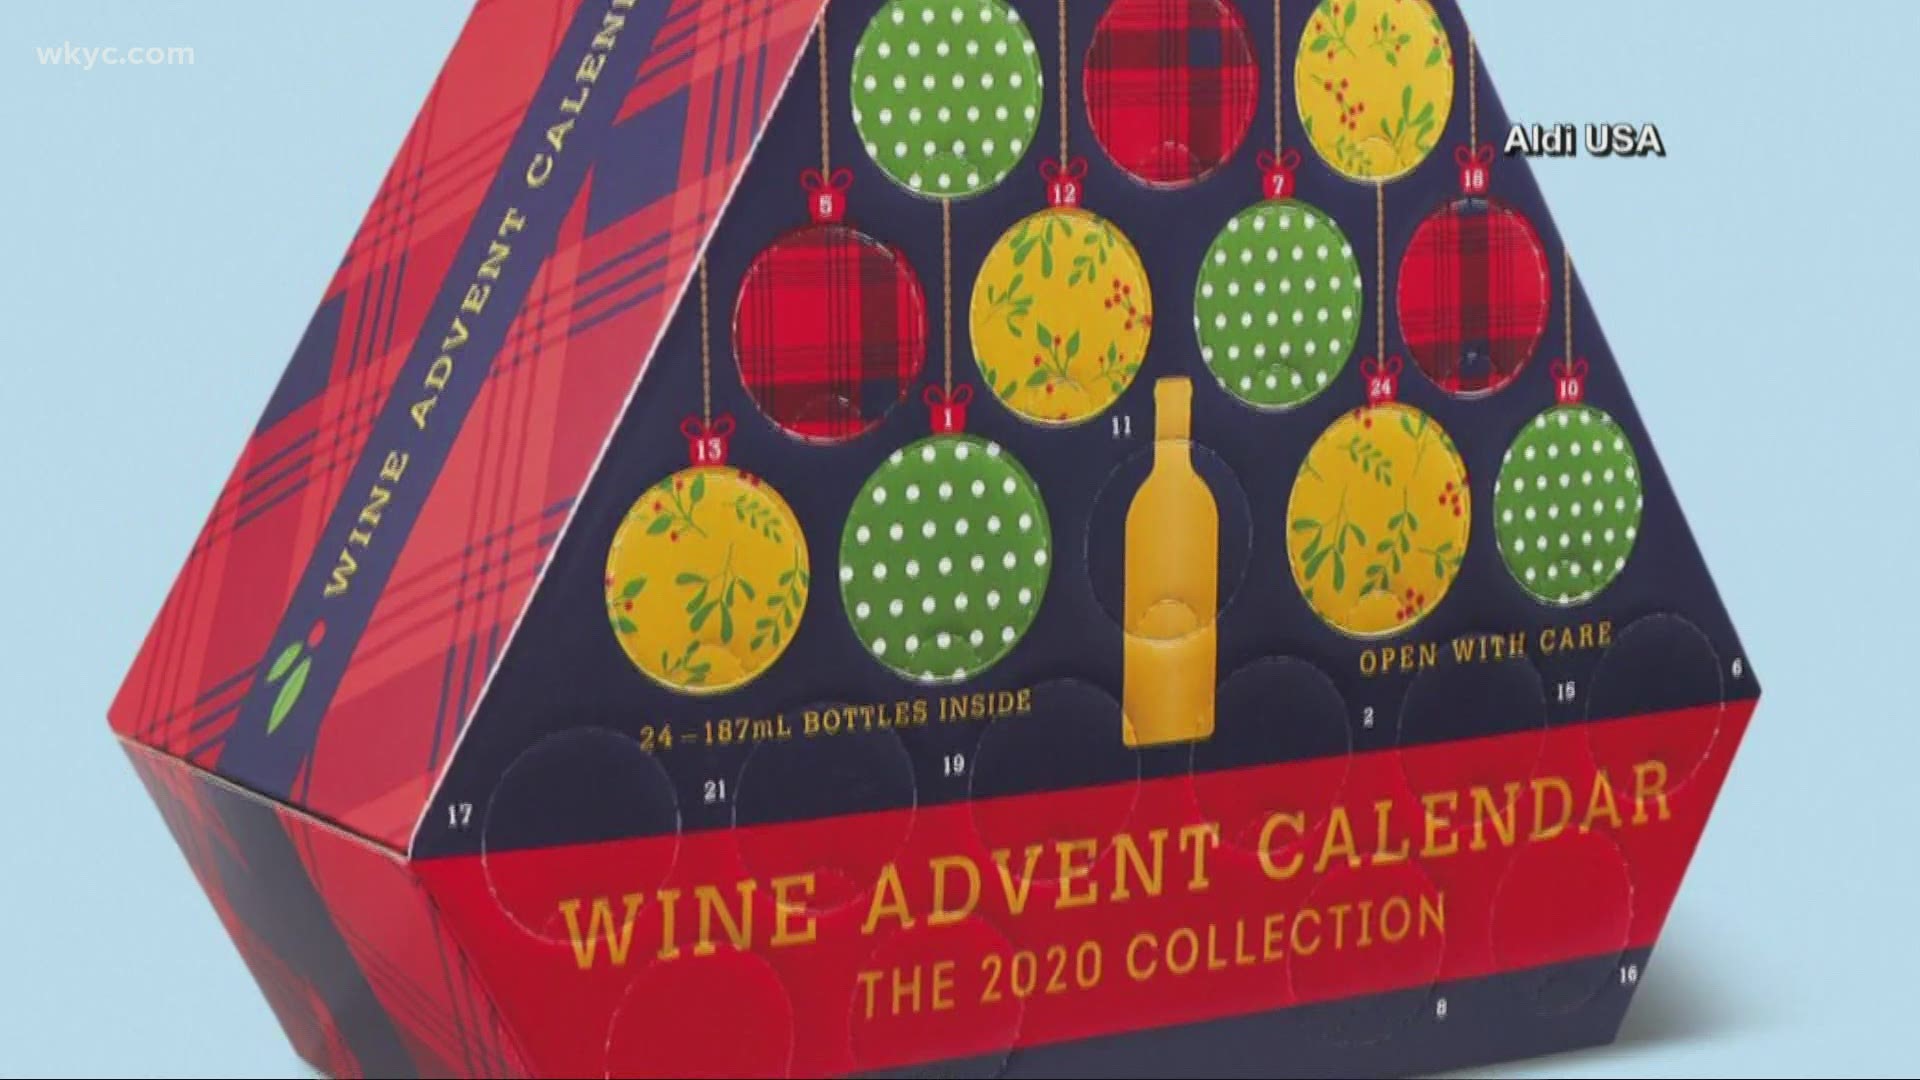 Sept. 15, 2020: If you love ALDI's Advent calendars, there are more choices this year than ever before. Here's a sneak peek at this year's wine calendar and more.